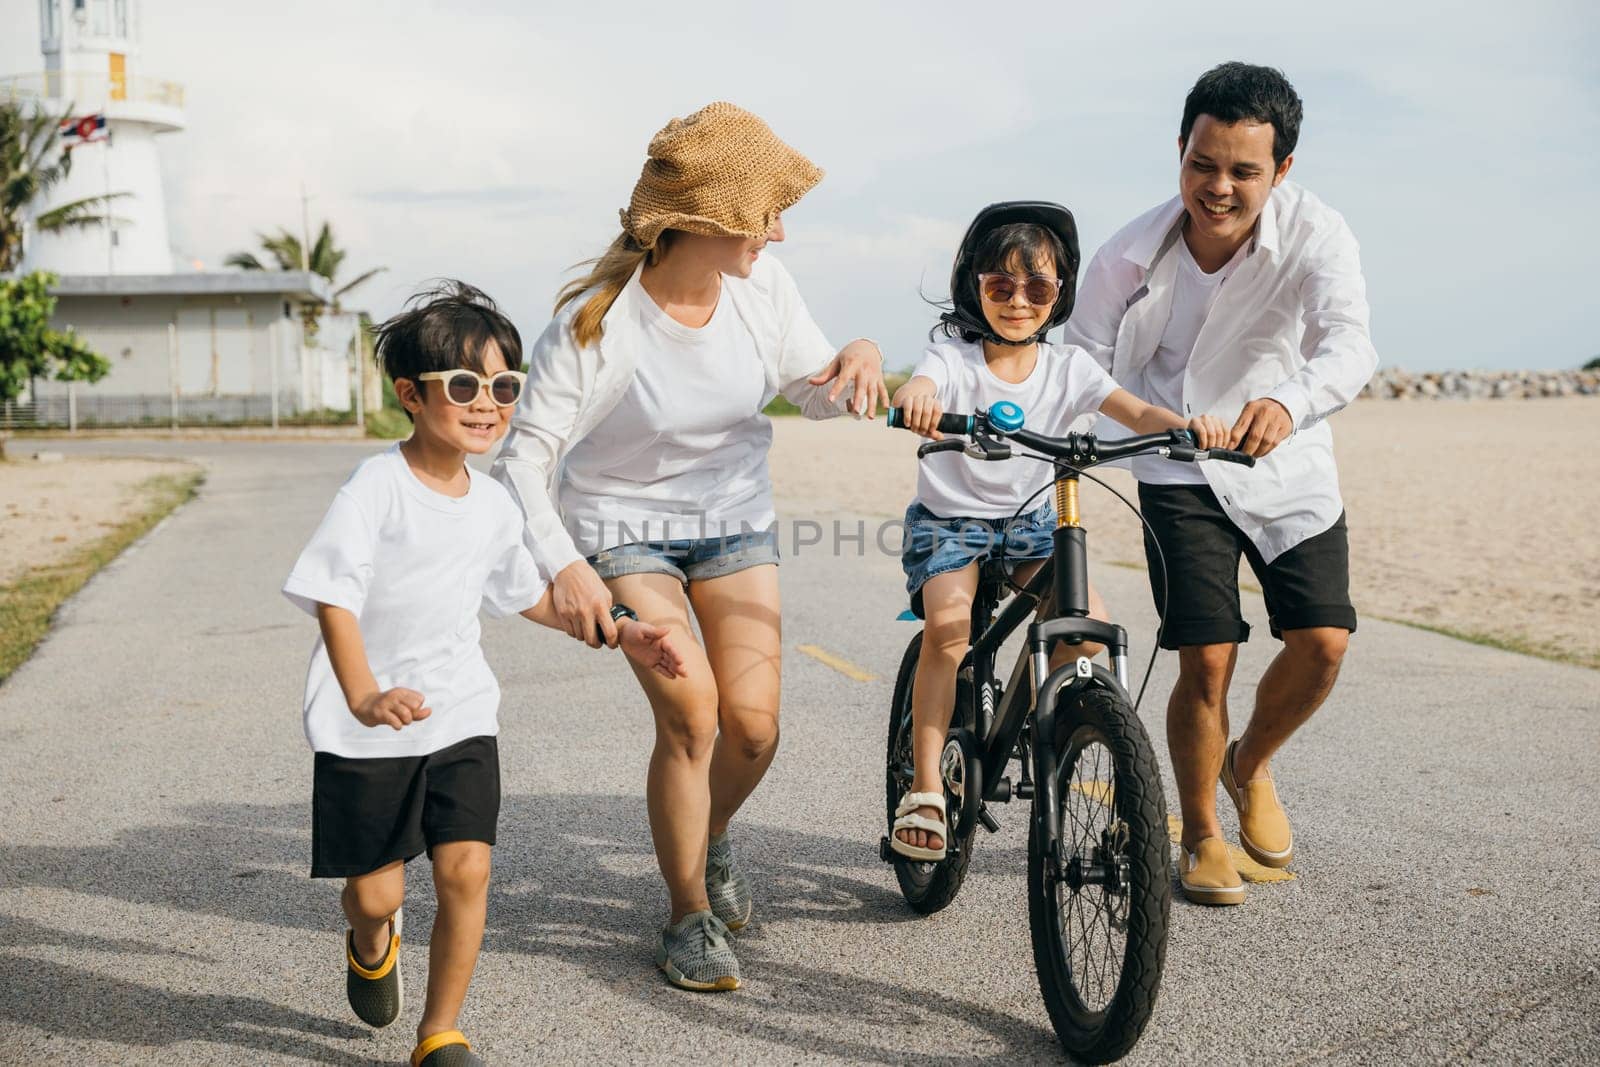 Sunset happiness on a sandy beach, A cheerful family enjoys a road trip teaching and learning bicycle riding. Safety laughter and joy of family bonds make this a perfect tourism day concept. by Sorapop